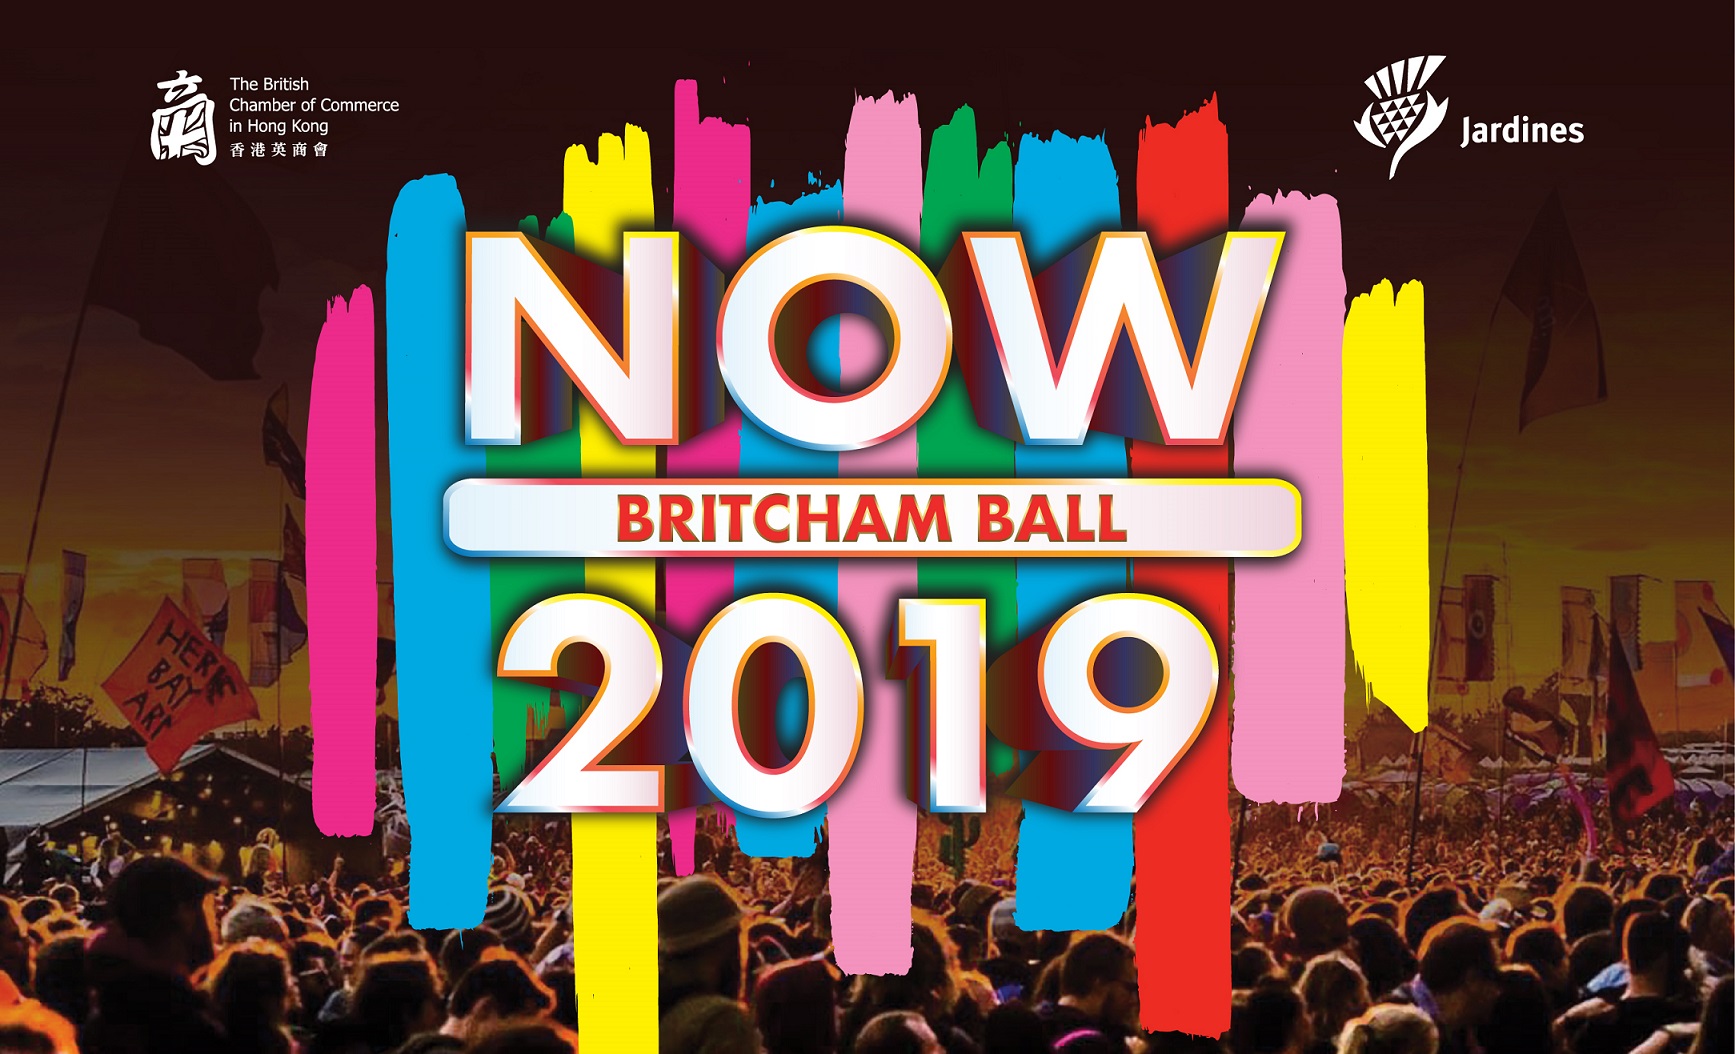 The Britcham Ball 2019: Now That's What I Call Music!